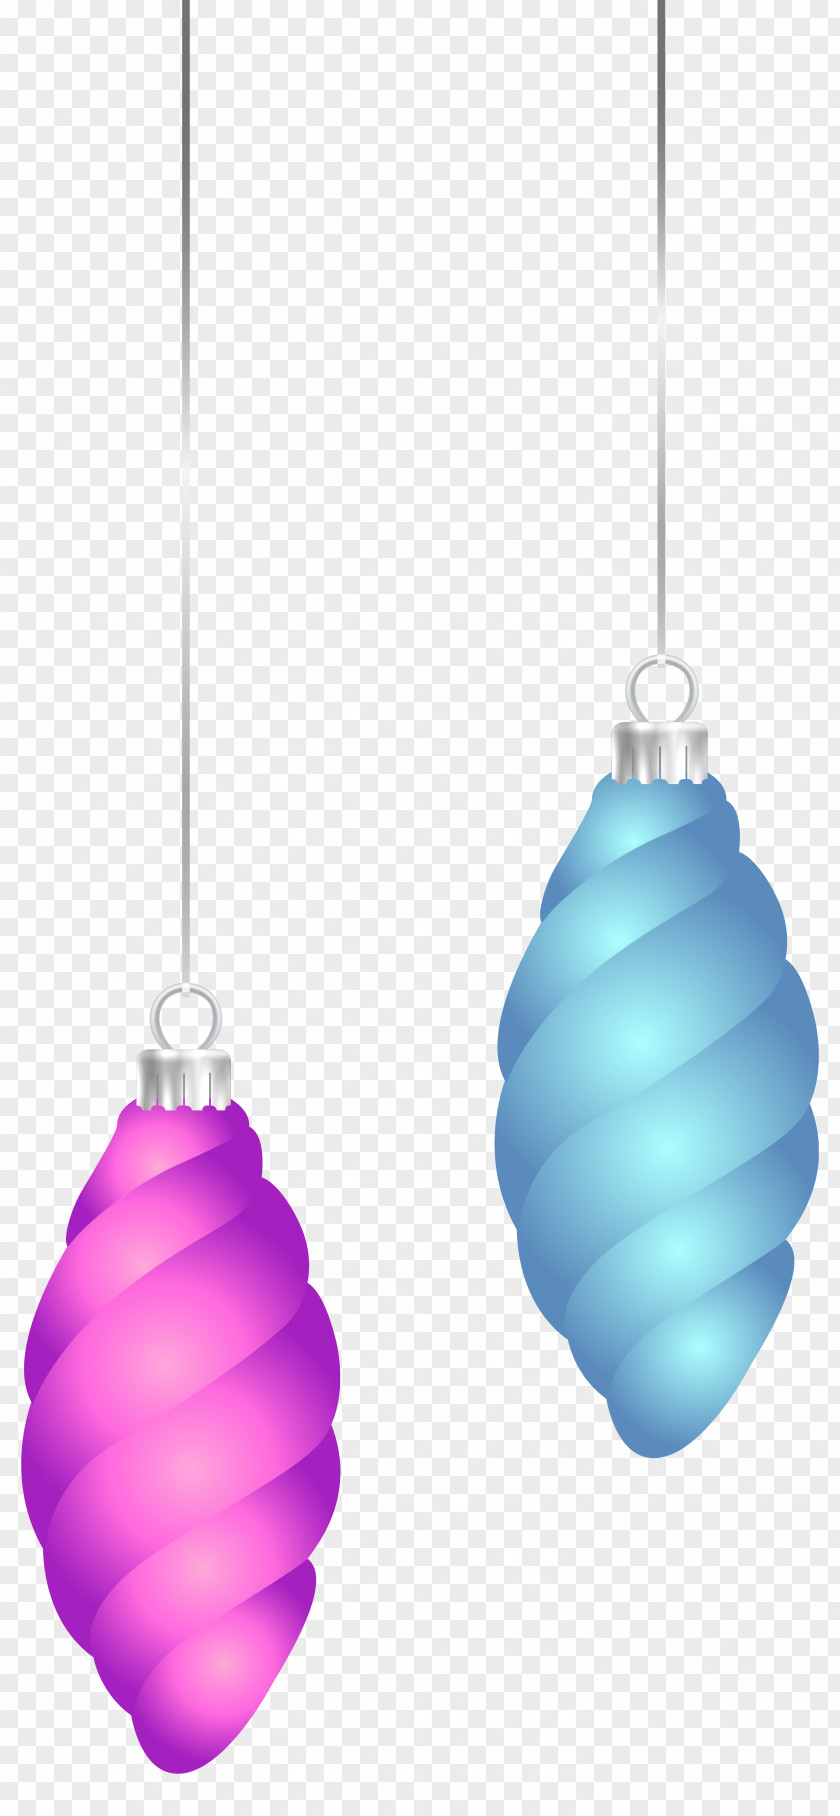 Christmas Ornaments Clip-Art Image Ornament Gift PNG